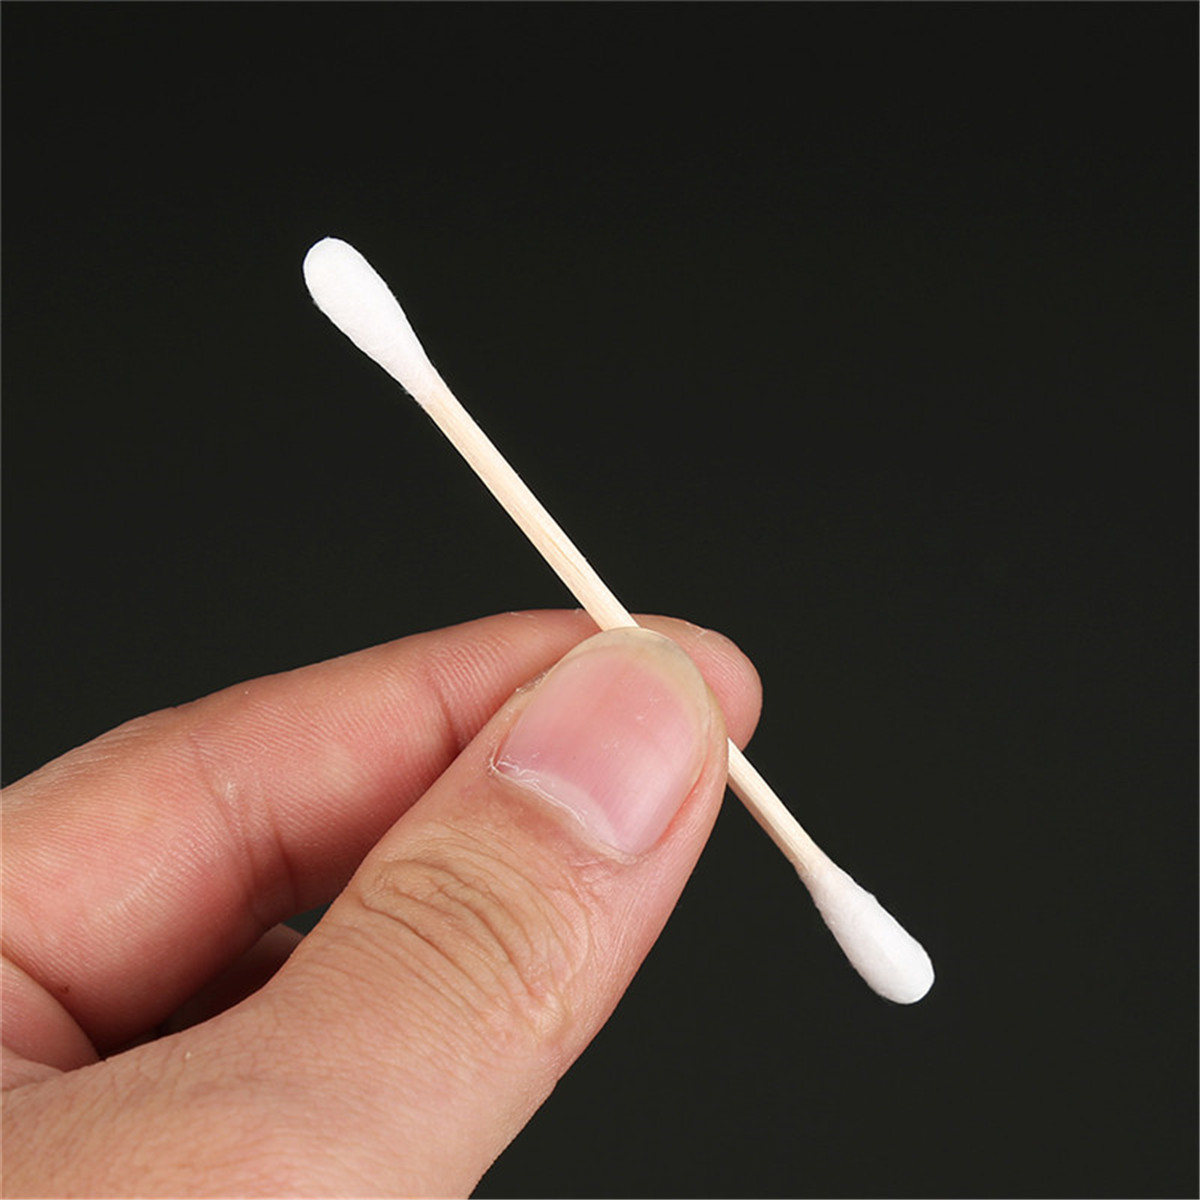 100x-Cotton-Swabs-Swab-Applicator-Q-Tips-Double-Head-Wooden-Stick-Cleaning-Tools-1582736-10